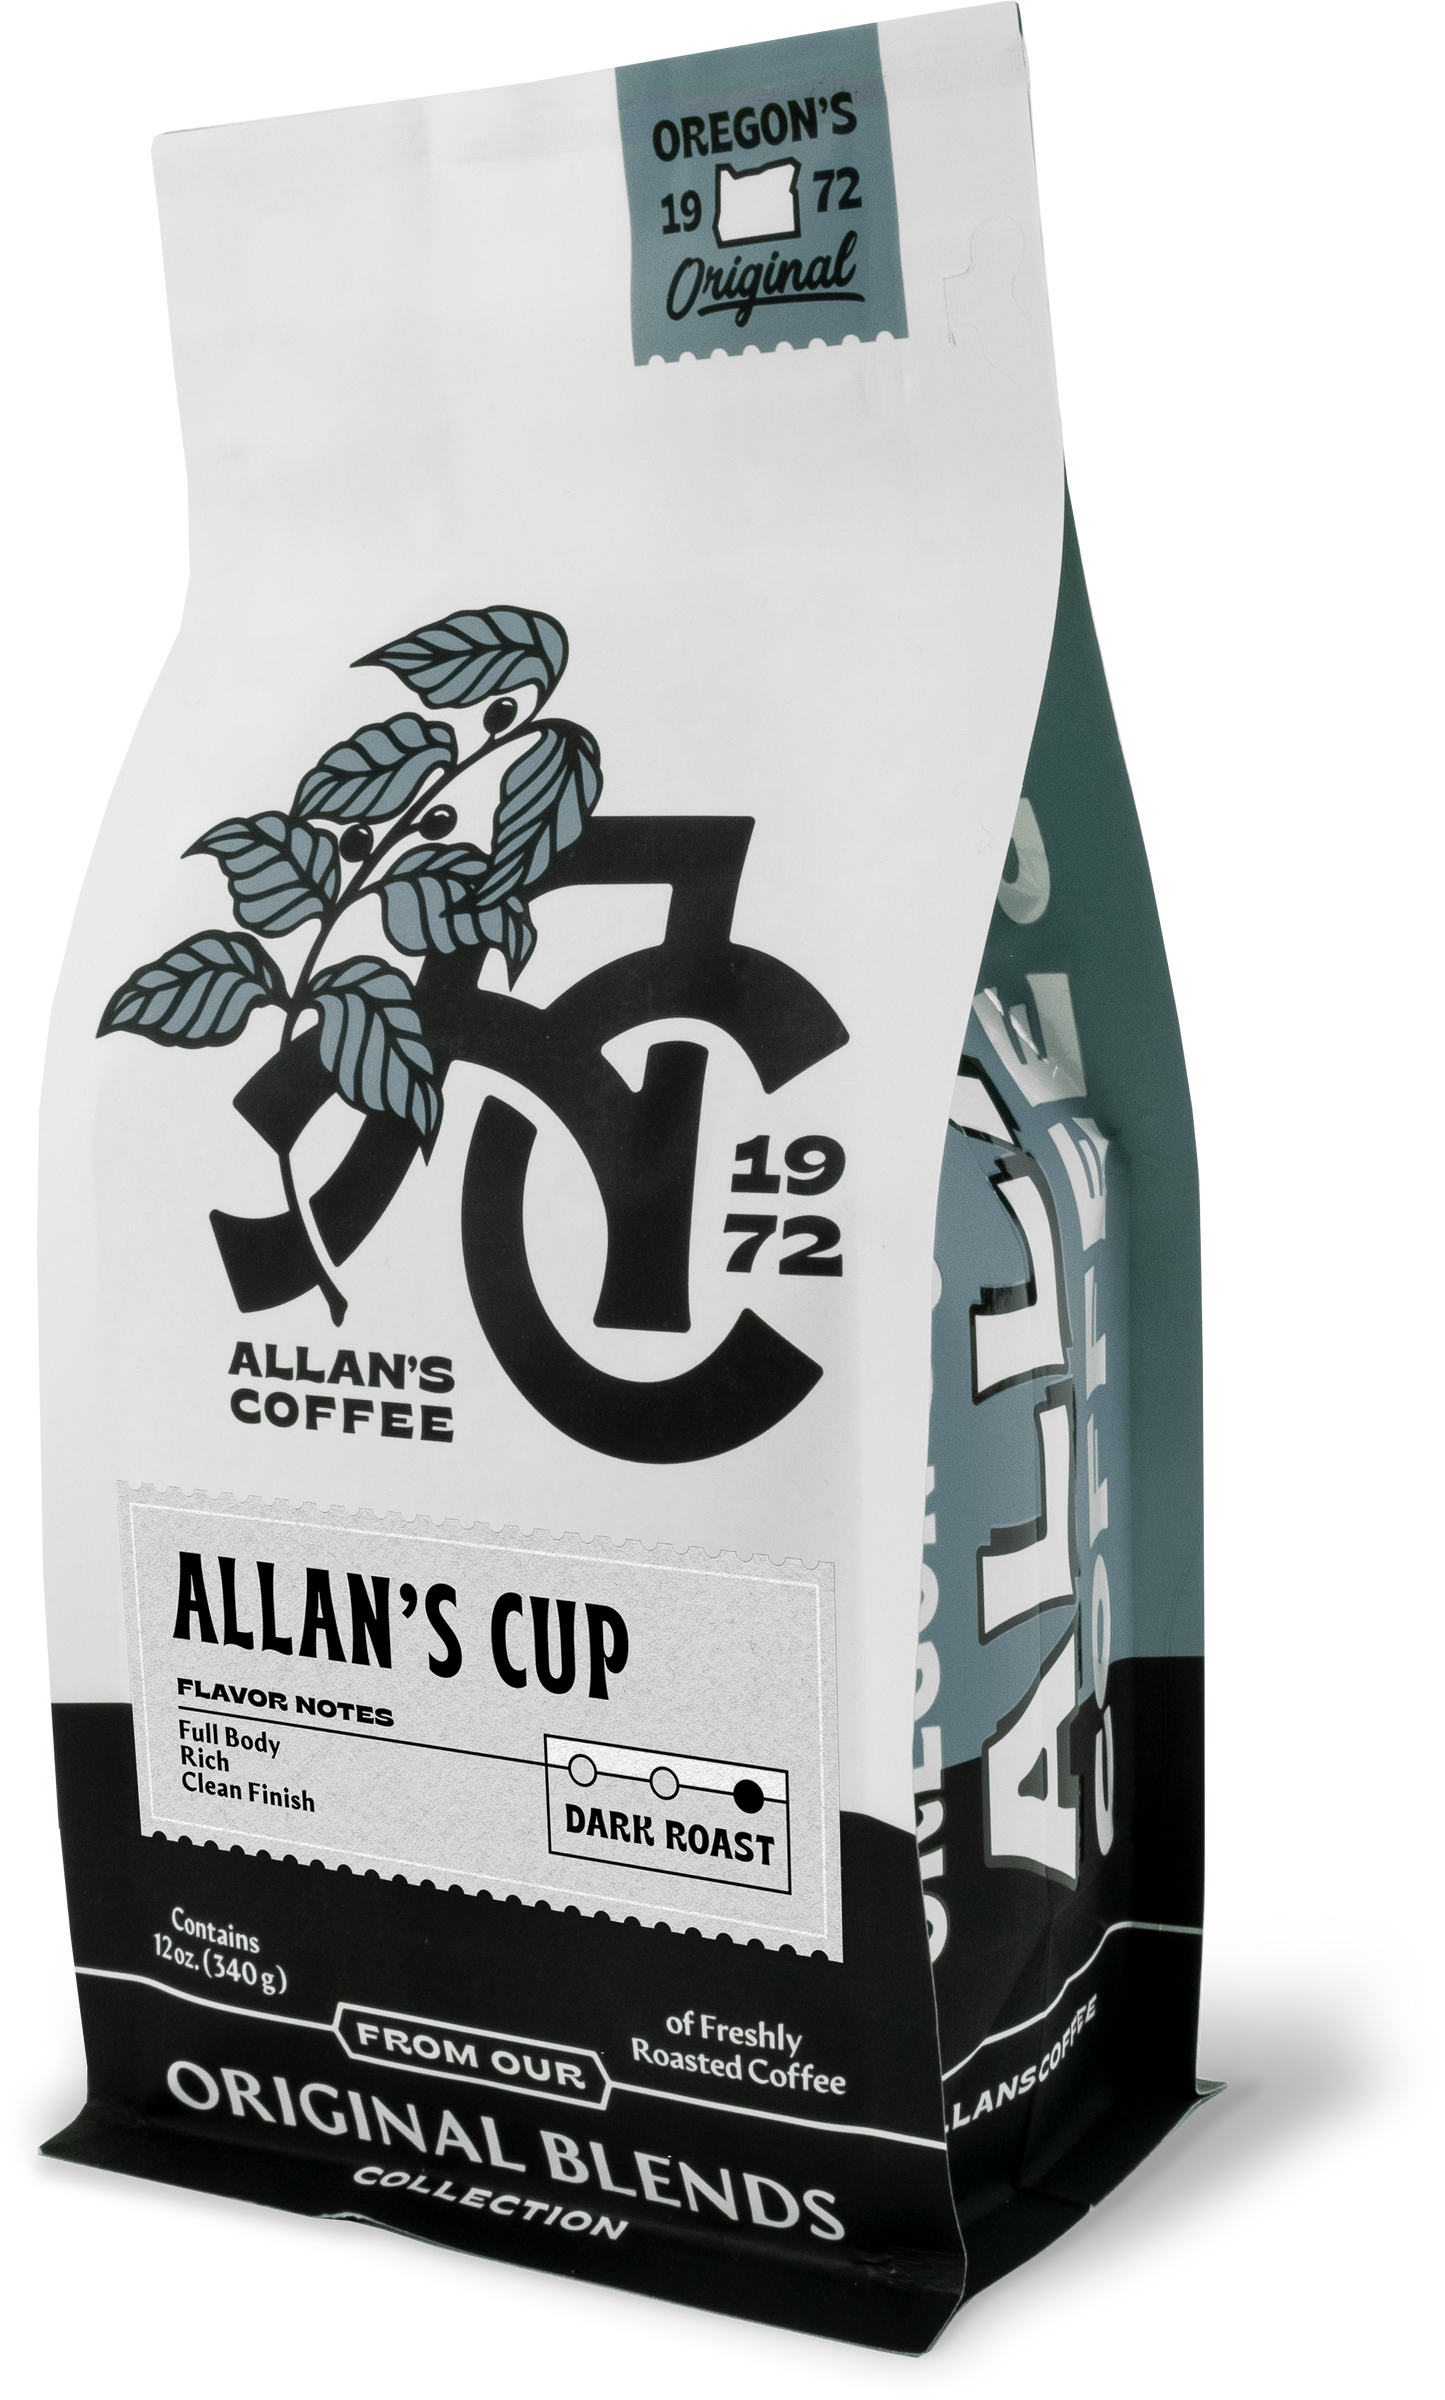 Allan's Cup